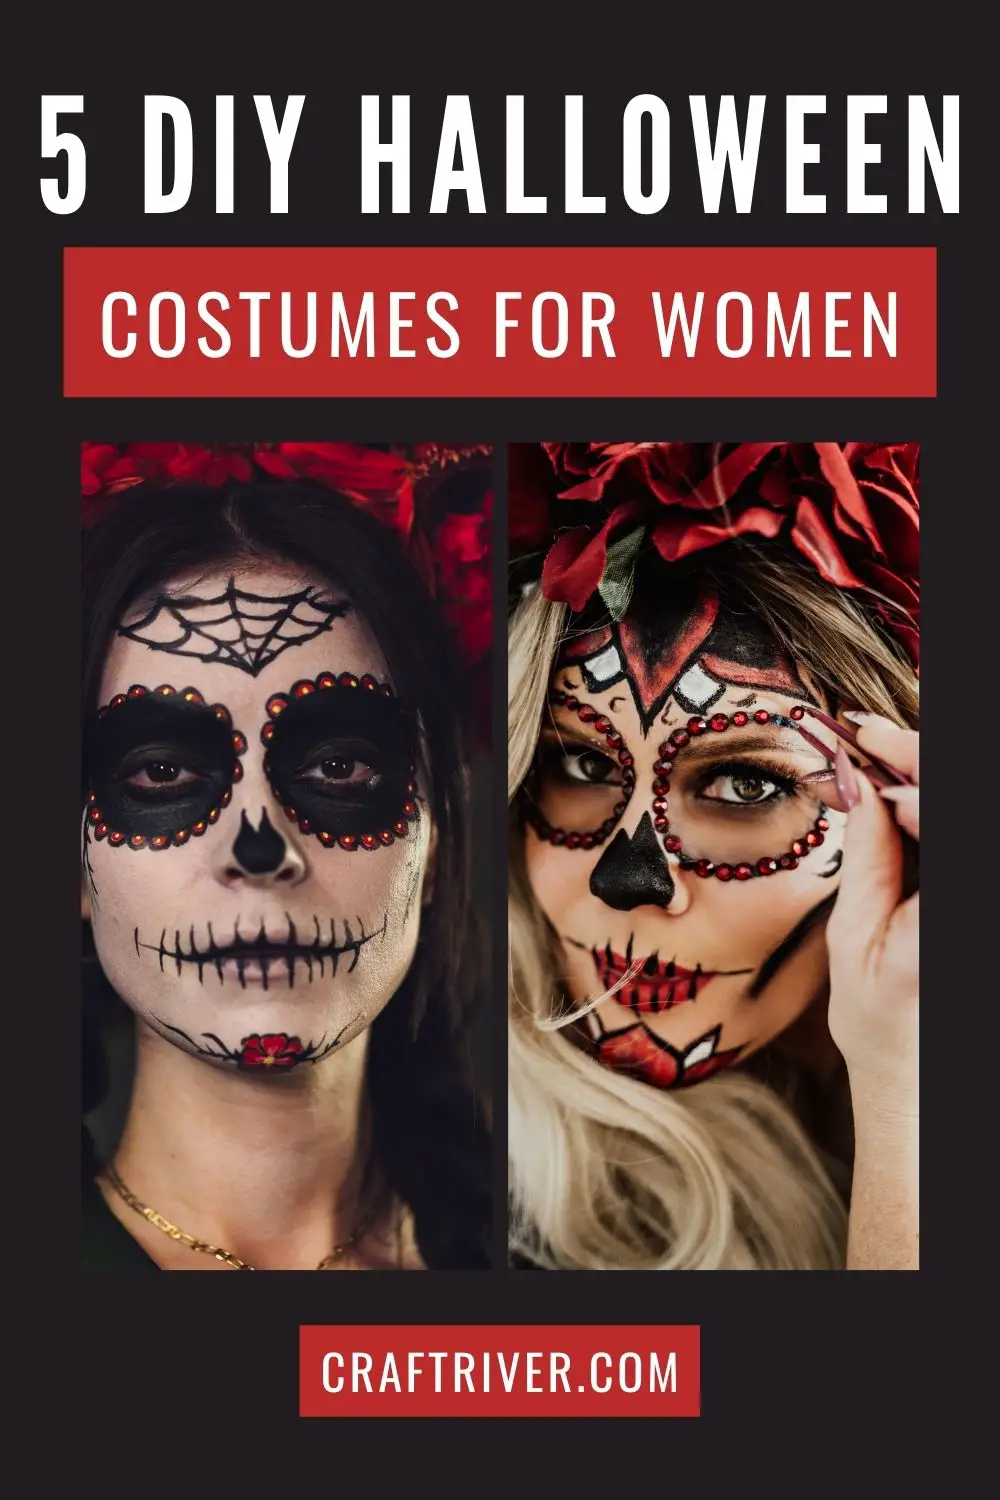 5 DIY Halloween Costumes For Women That Will Have You Looking Boo-tiful